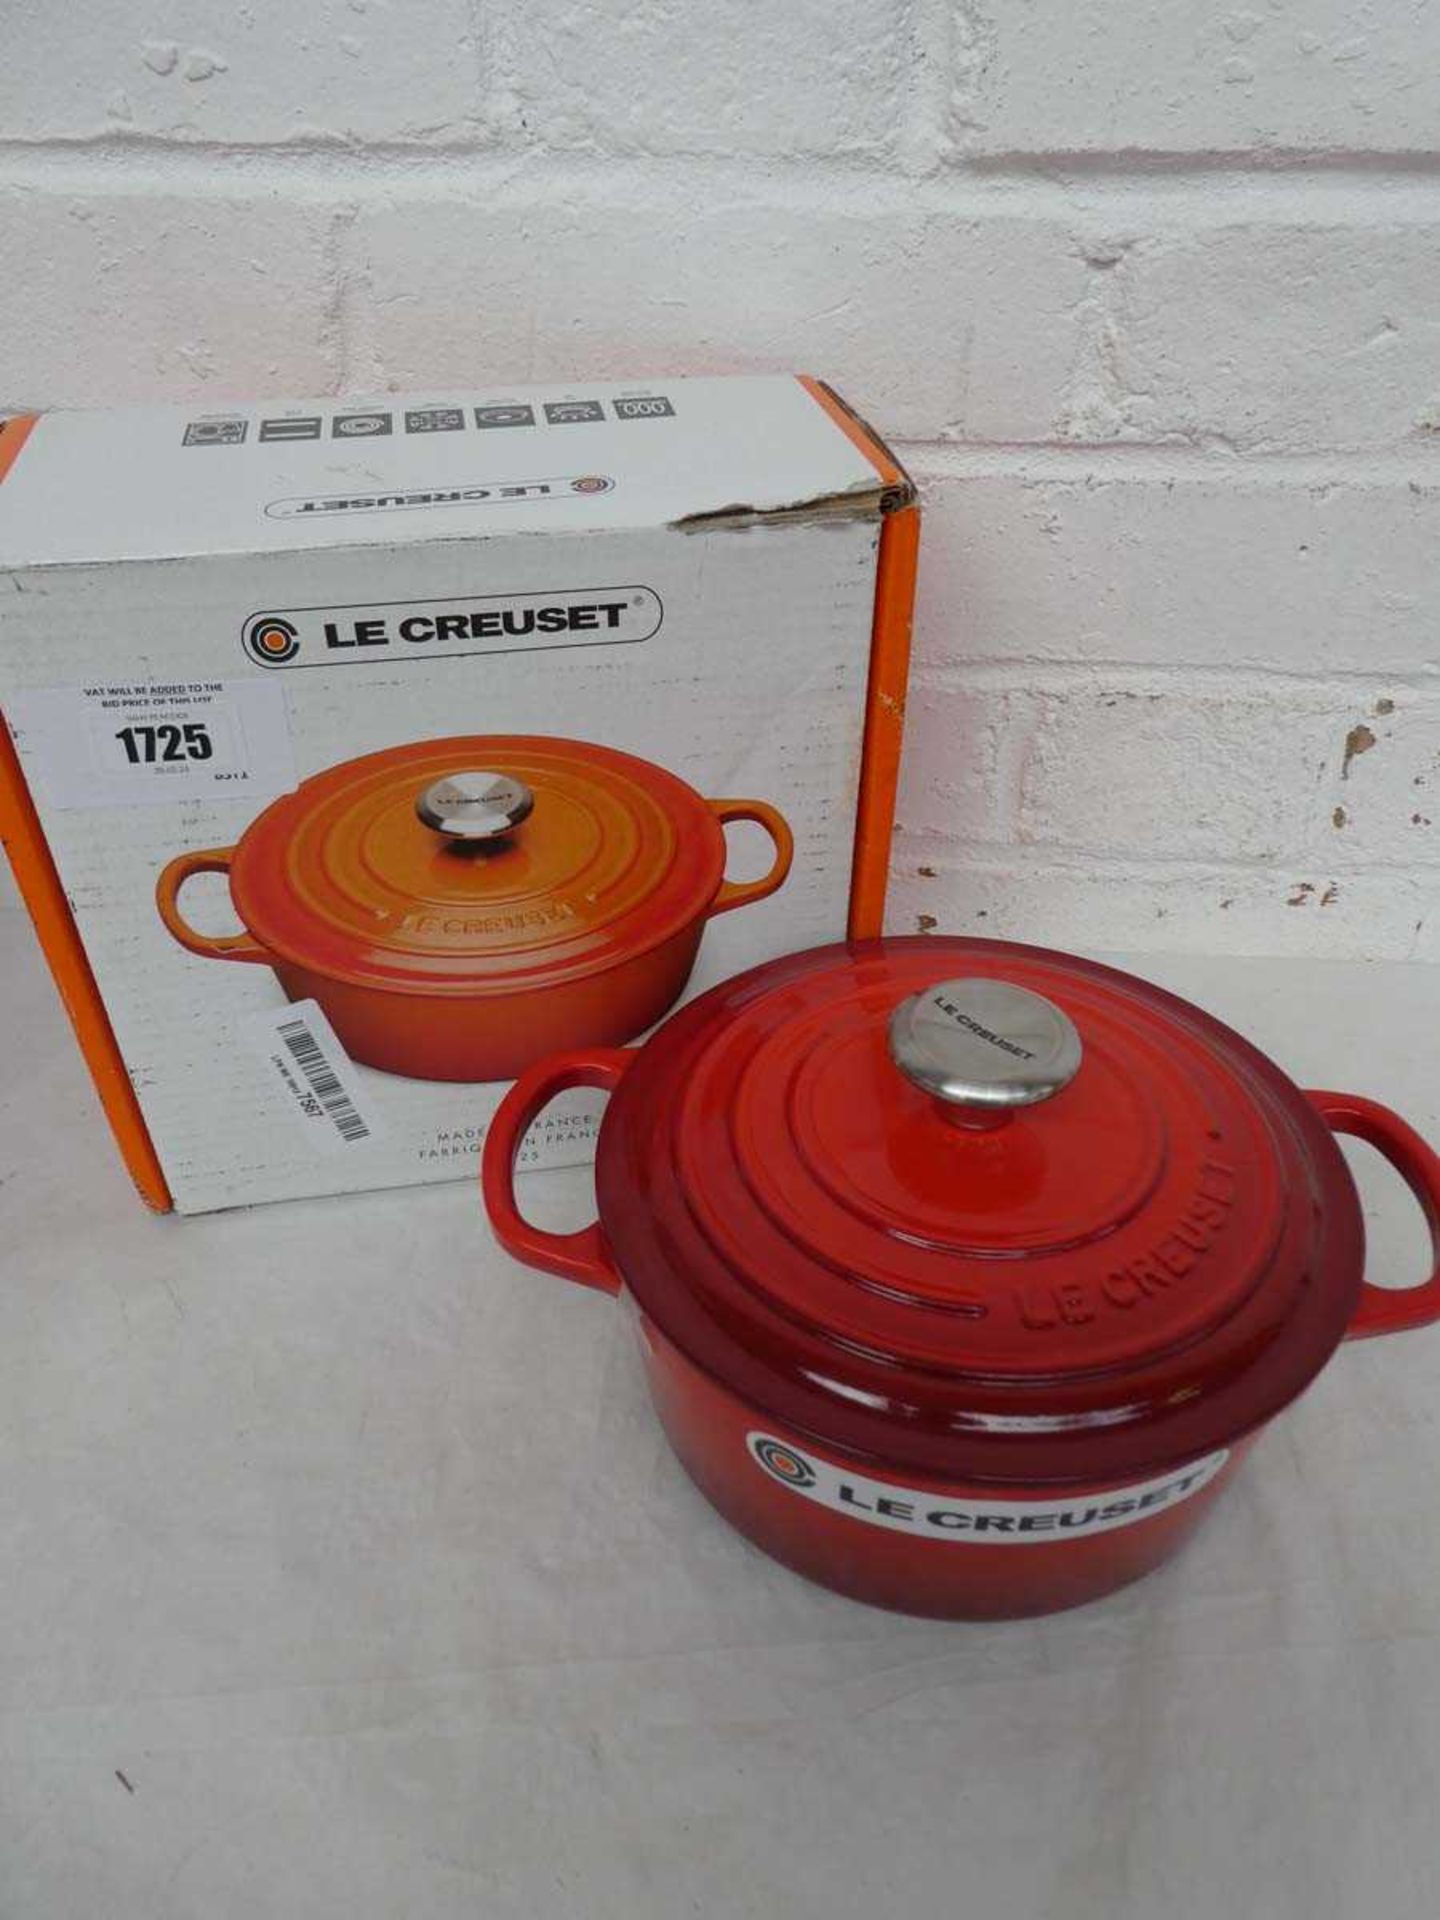 +VAT Le Creuset enamelled cast iron signature round casserole dish with lid, size 1.8L, in red